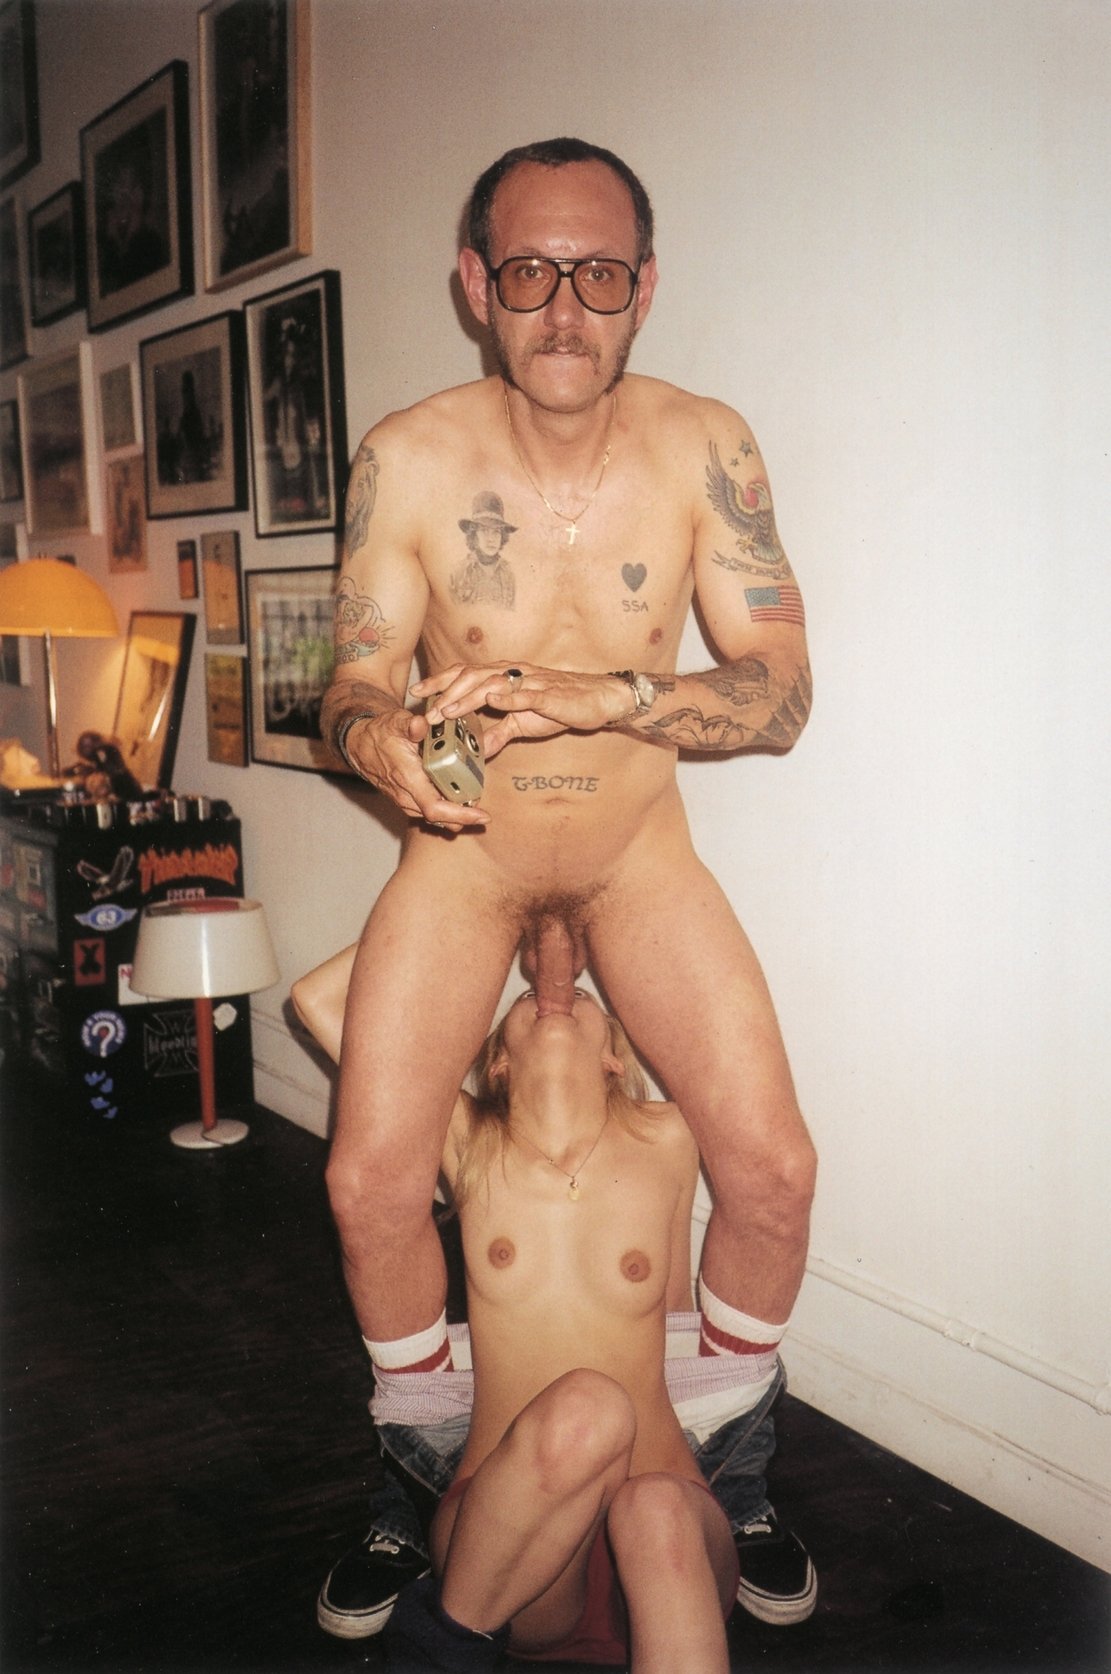 brian hargett recommends Terry Richardson Photos Nude